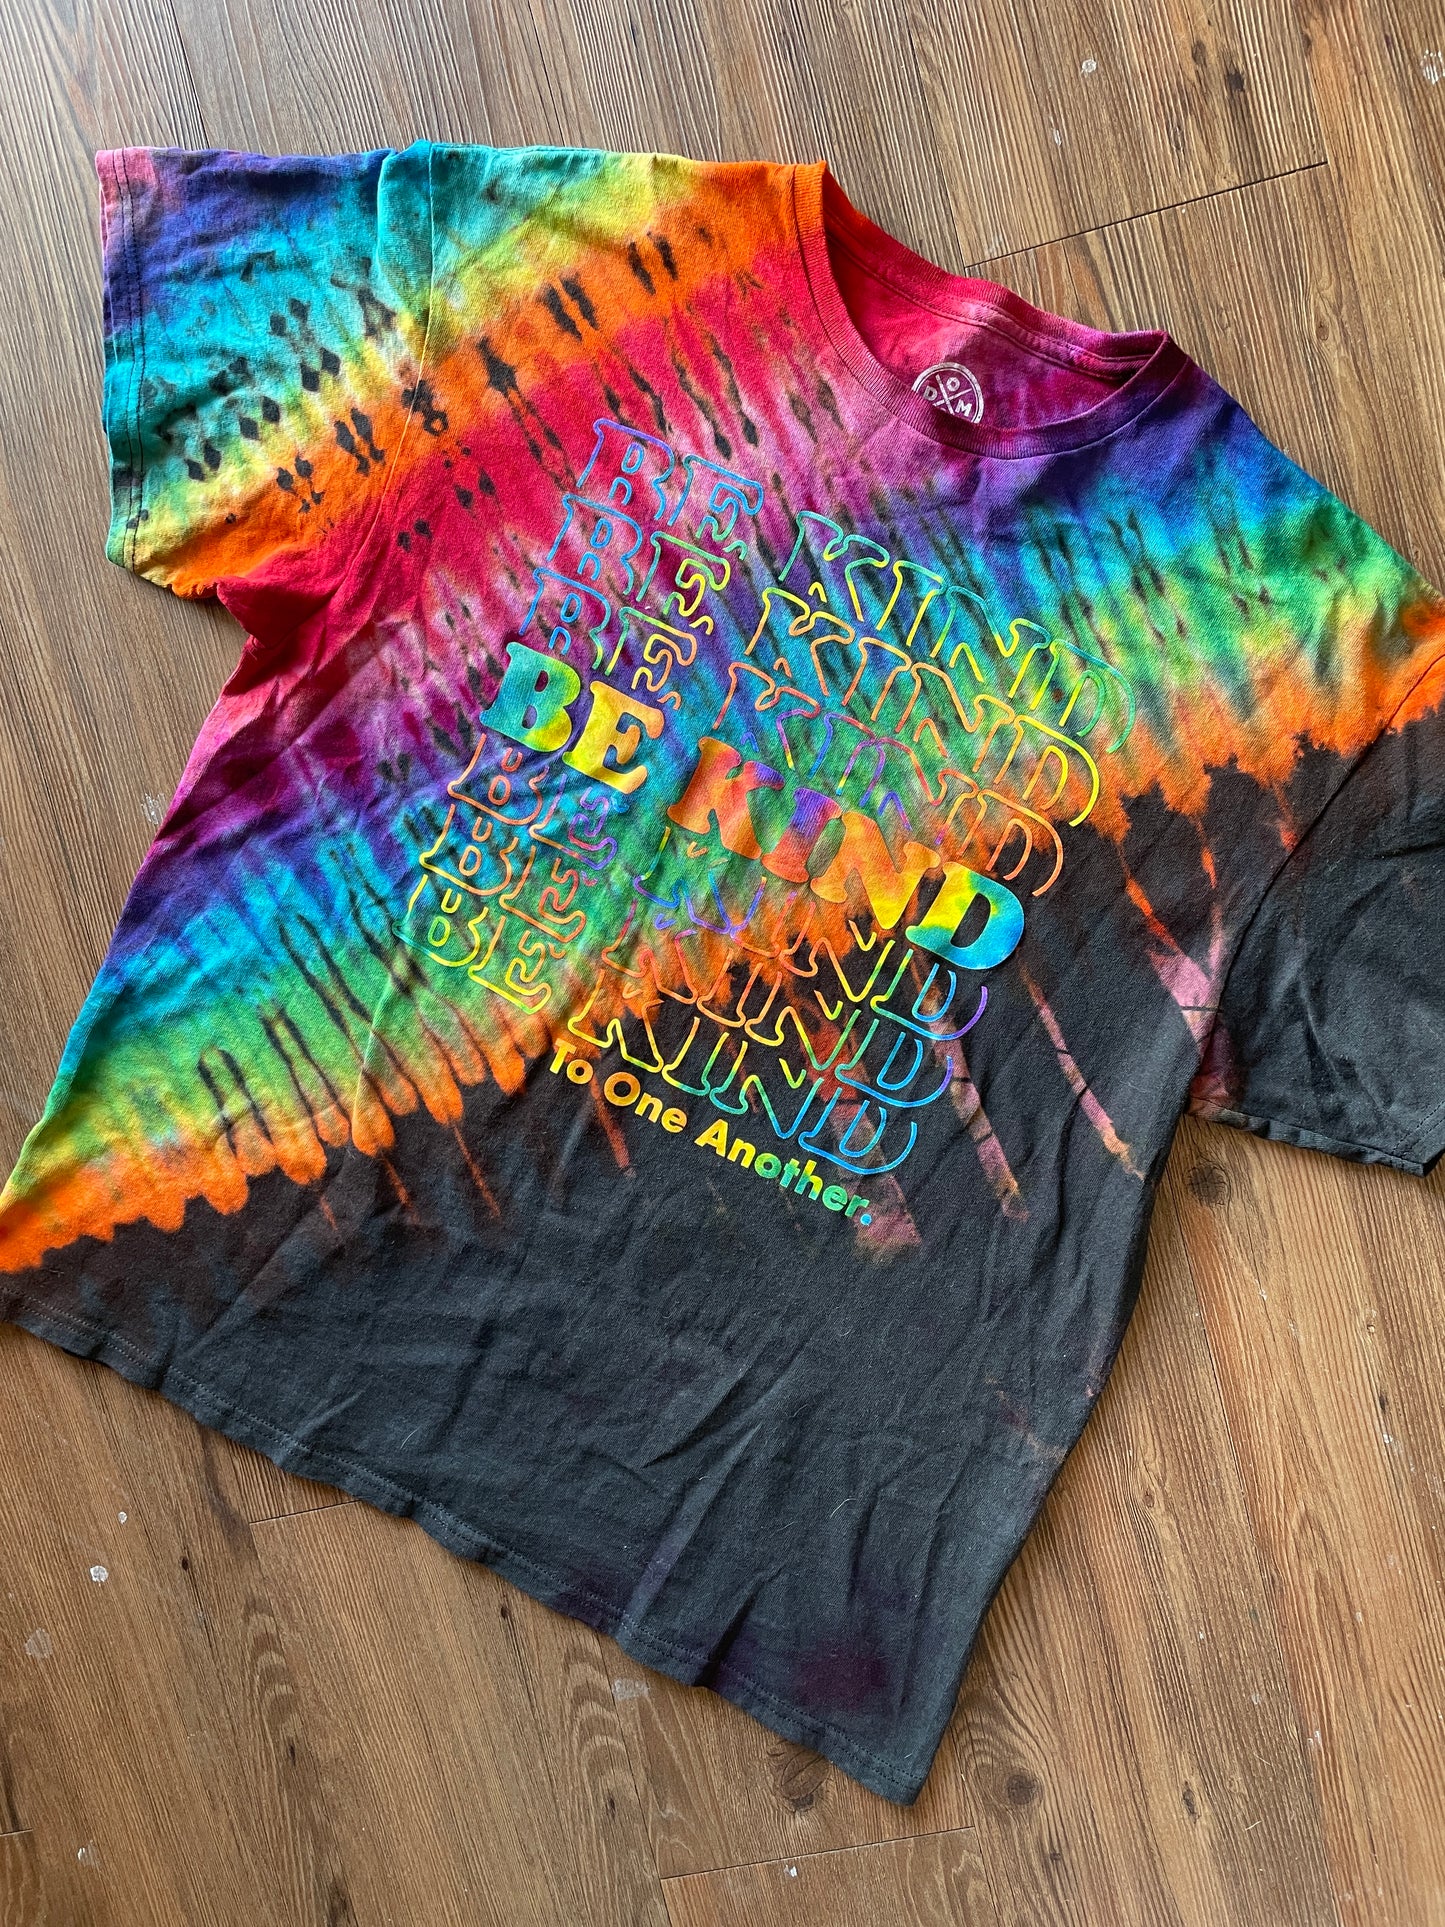 XL Men’s Be Kind To One Another Rainbow T-Shirt | Black and Rainbow Handmade Reverse Tie Dye Short Sleeve